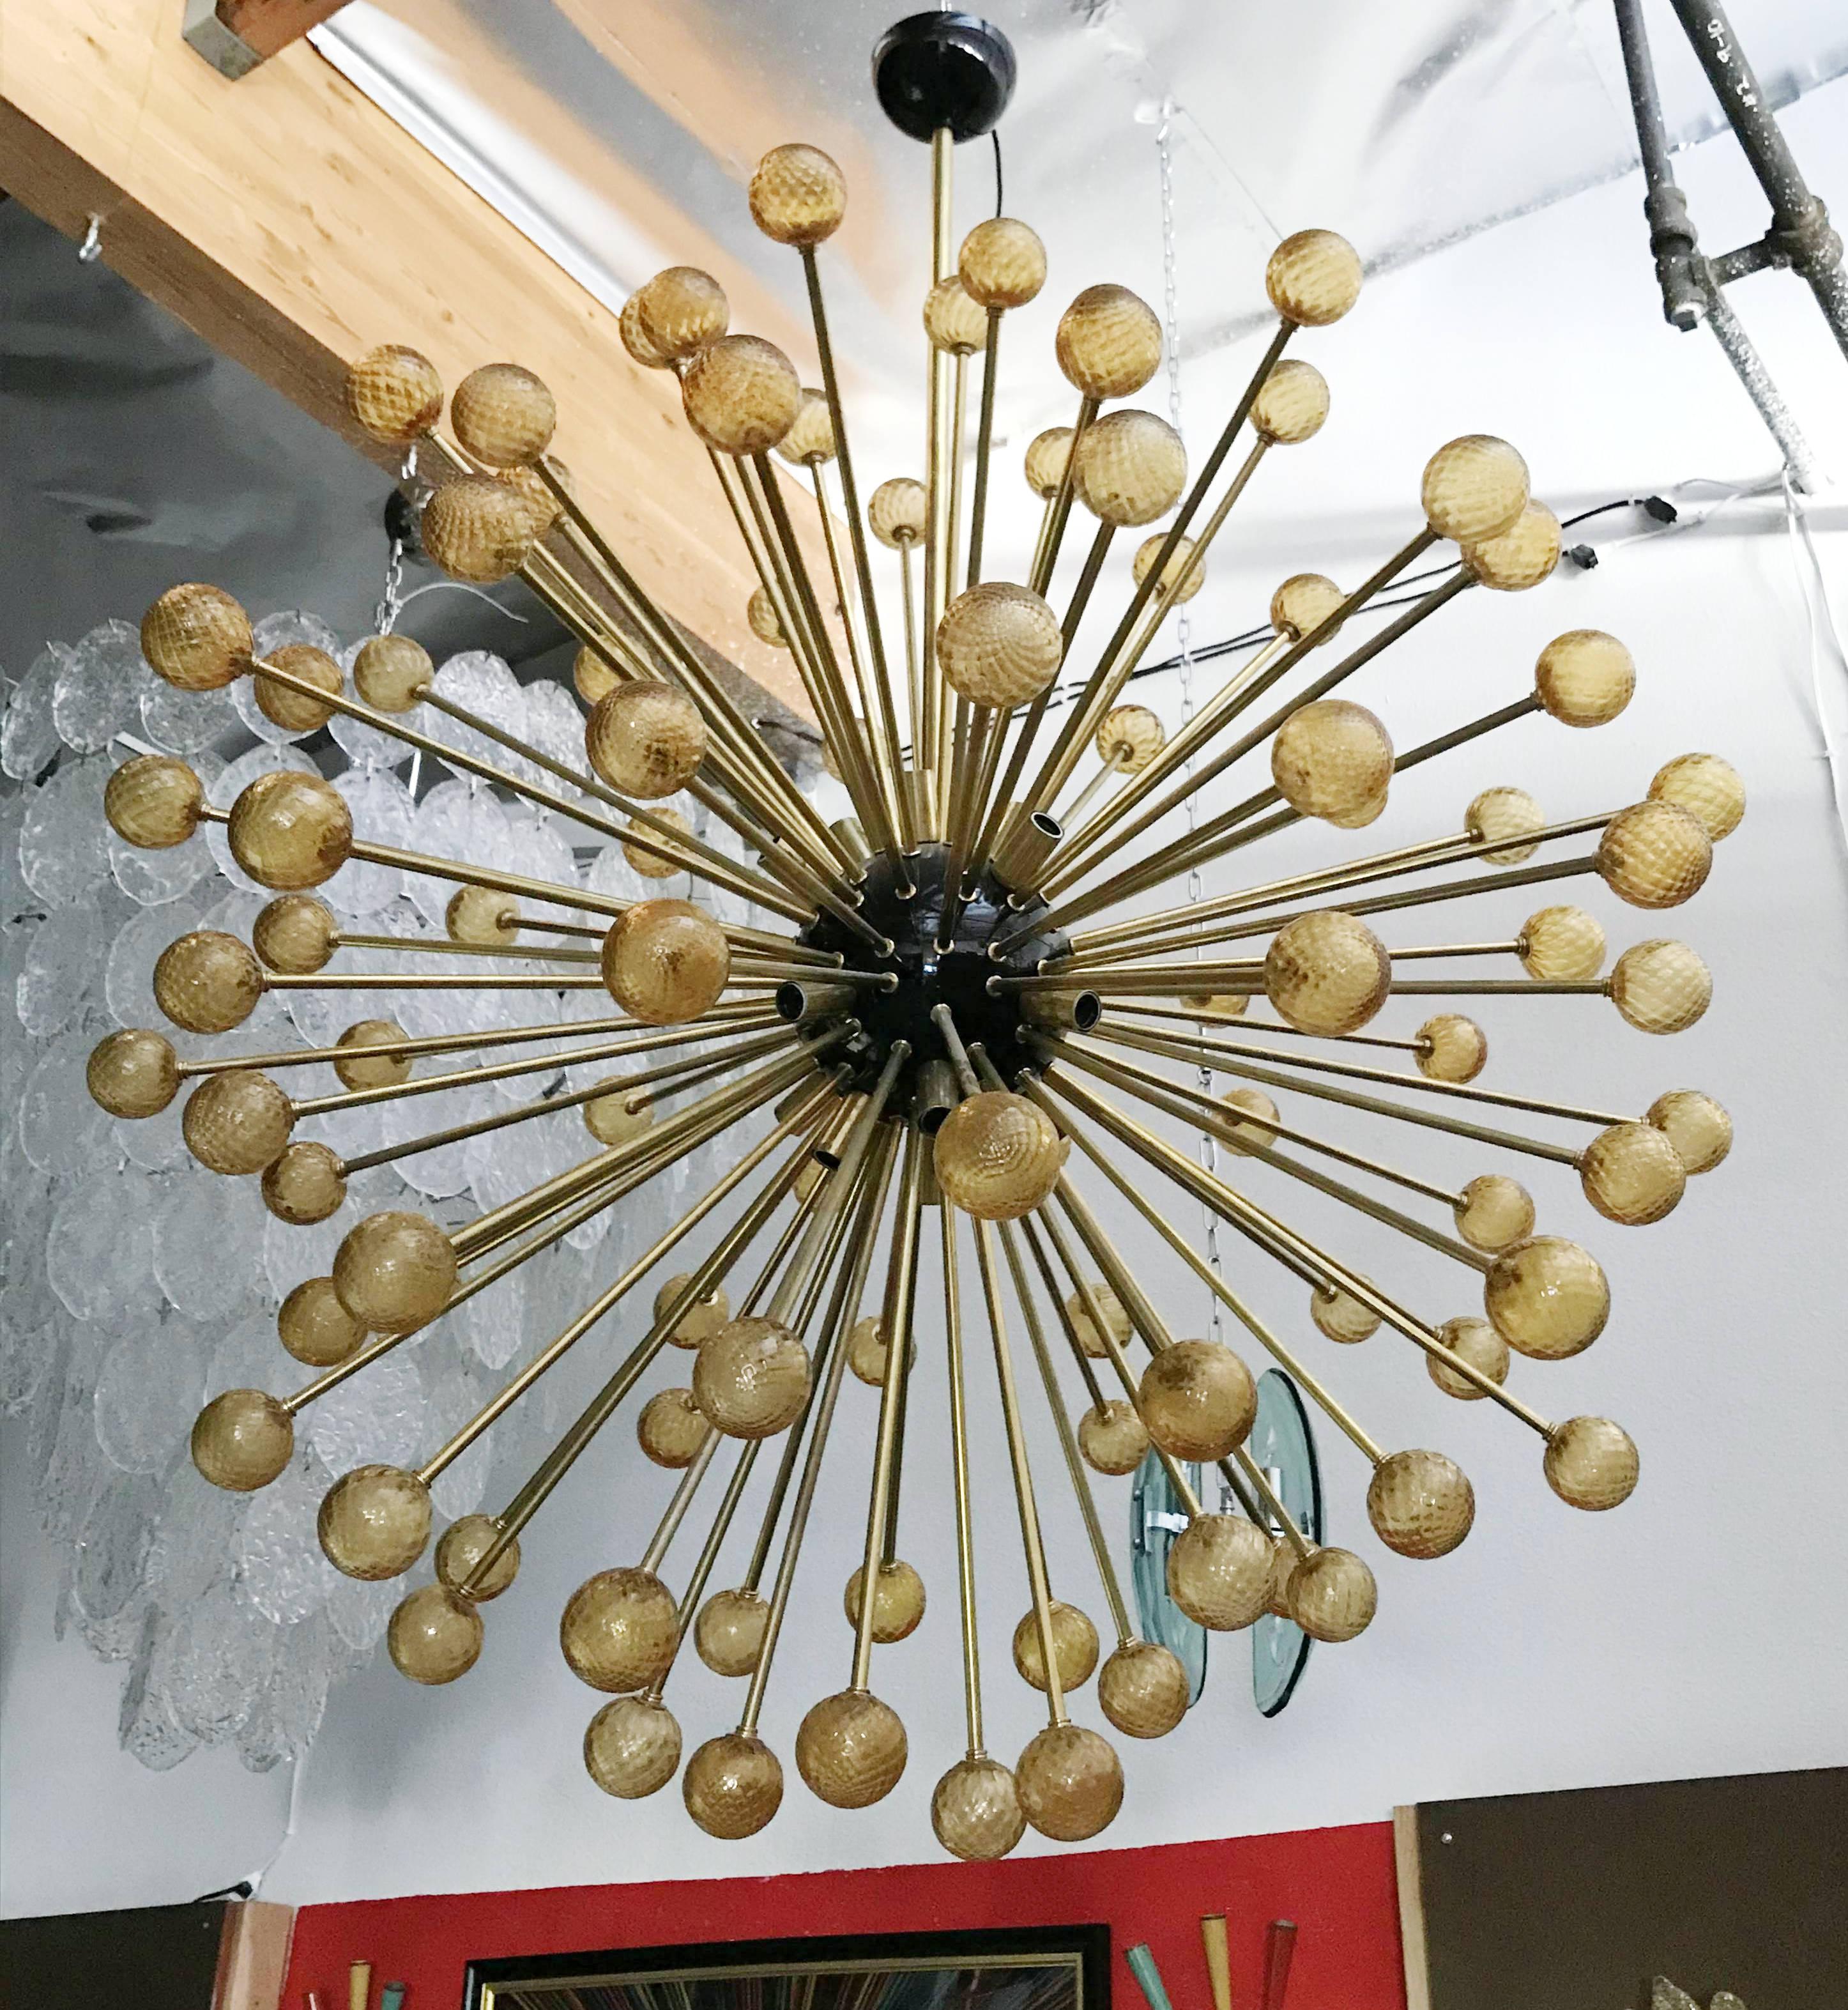 Italian modern sputnik chandelier with hand blown textured amber Murano glass spheres, mounted on brass frame with black enameled center / Designed by Fabio Bergomi for Fabio Ltd. / Made in Italy
16 lights / E12 or E14 type / max 40W each
Measures: